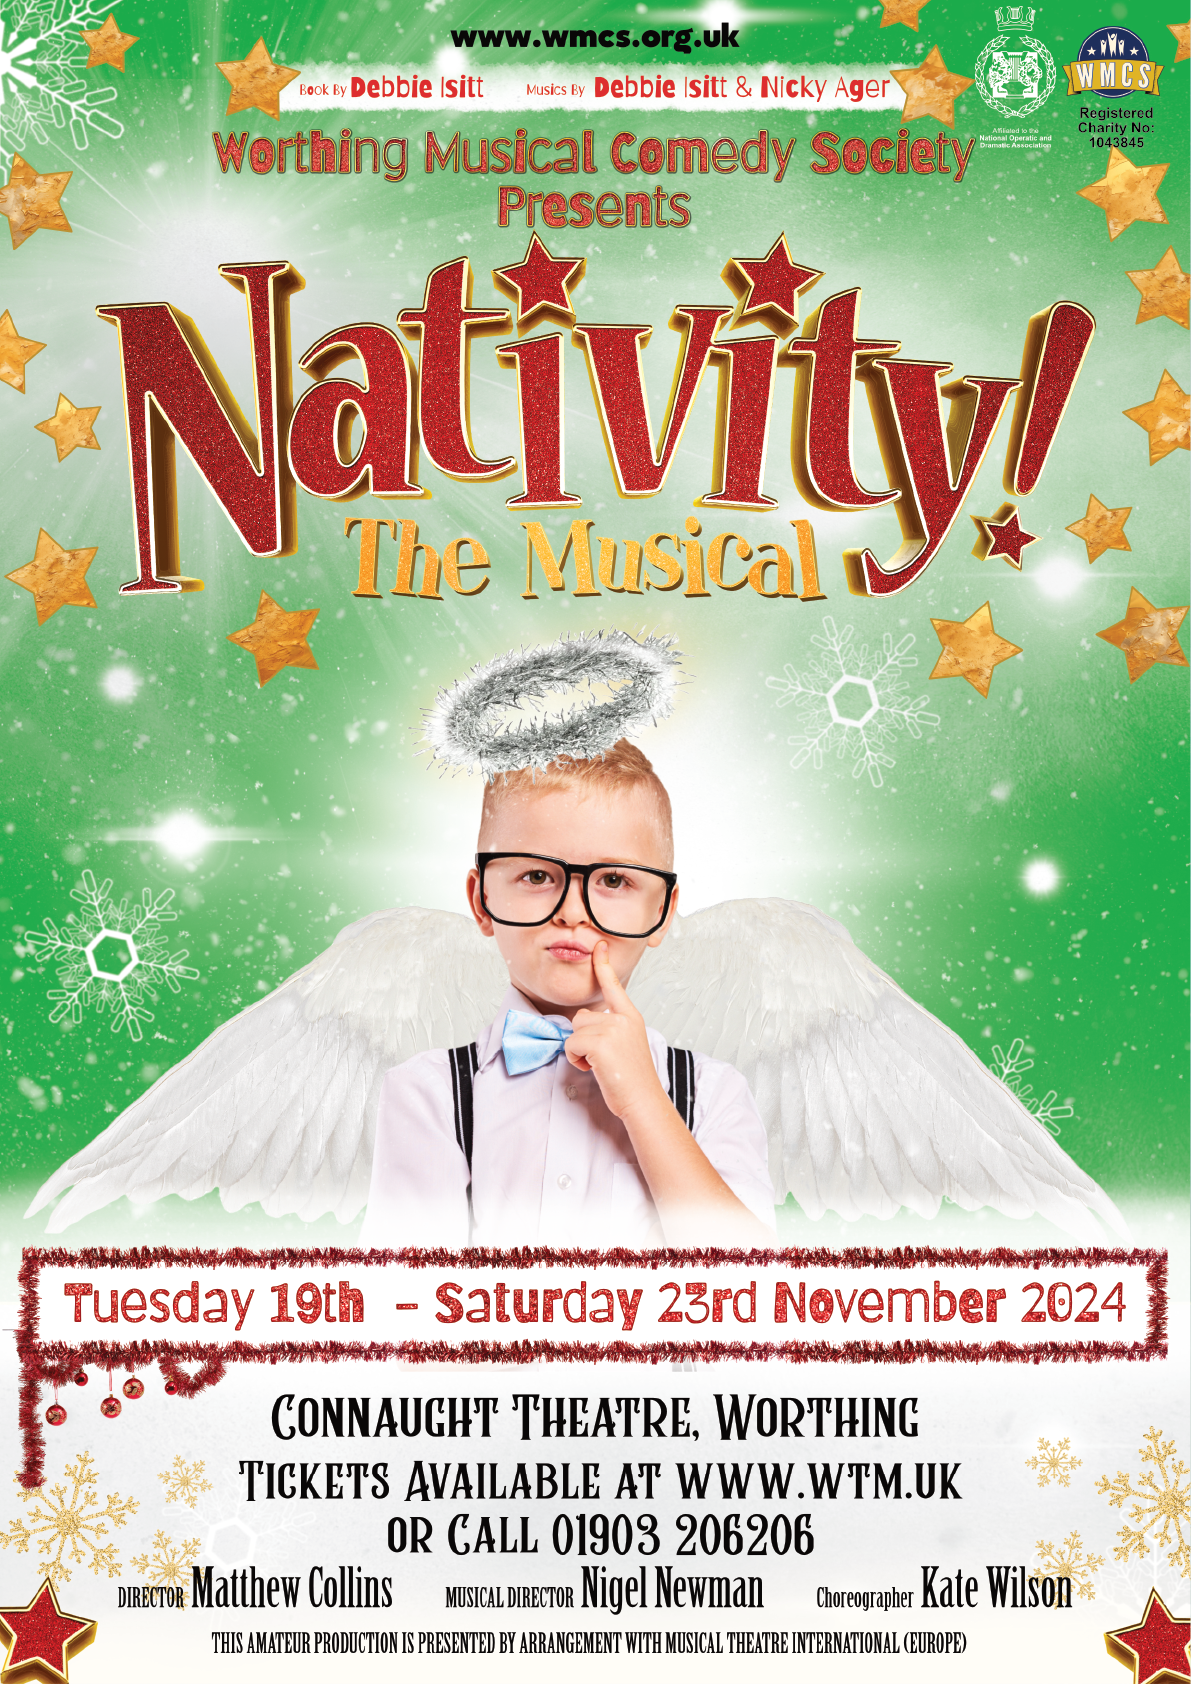 Poster for WMCS' November production of Nativity